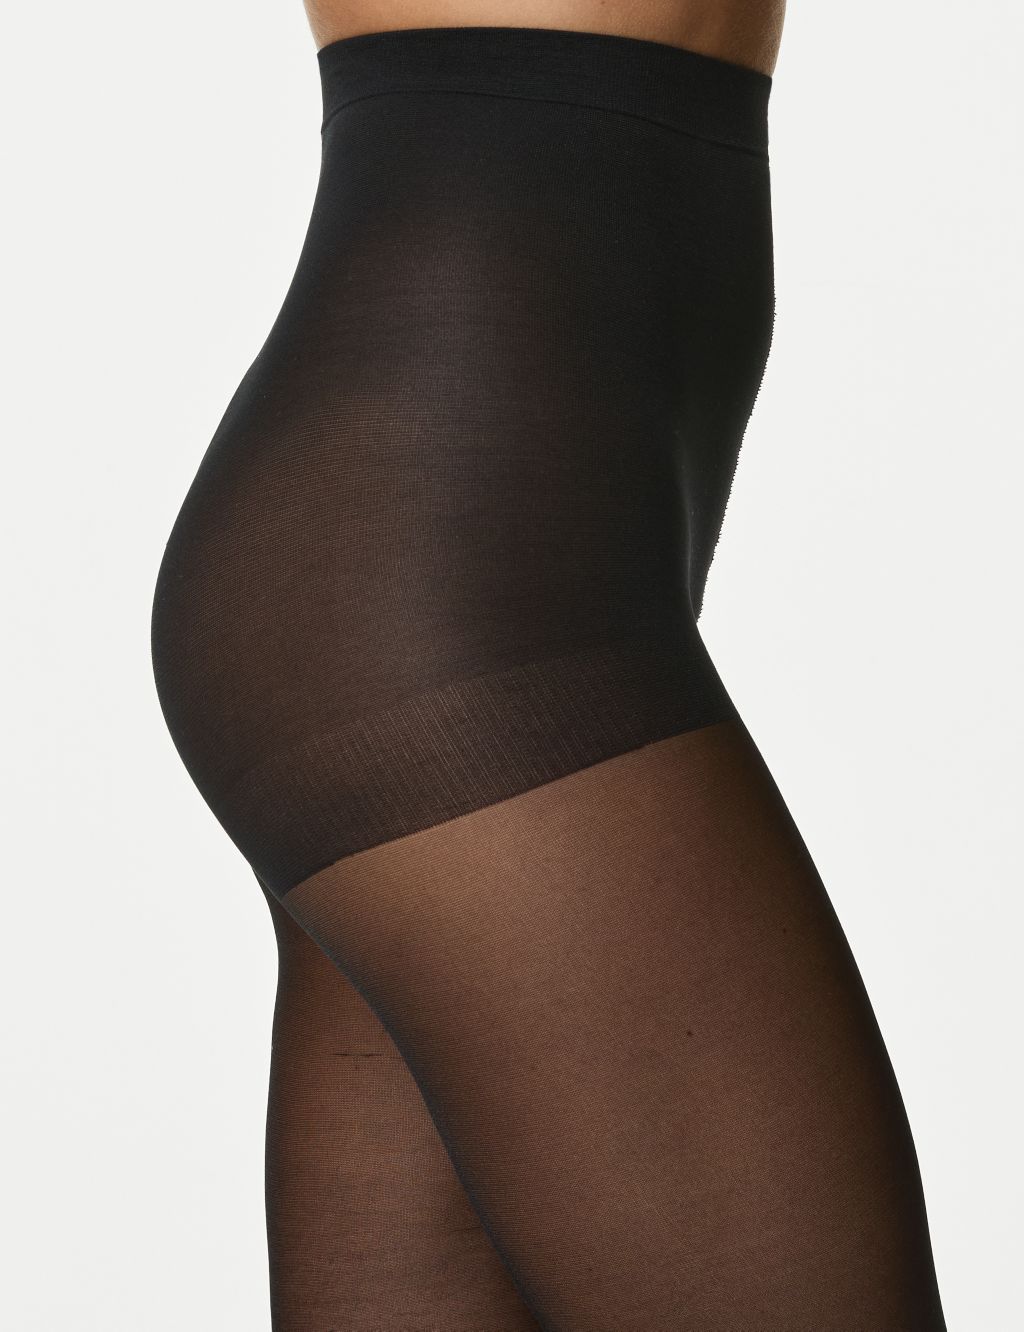 Conceit Mixed Accuser support tights marks and spencer Human Ant speaker